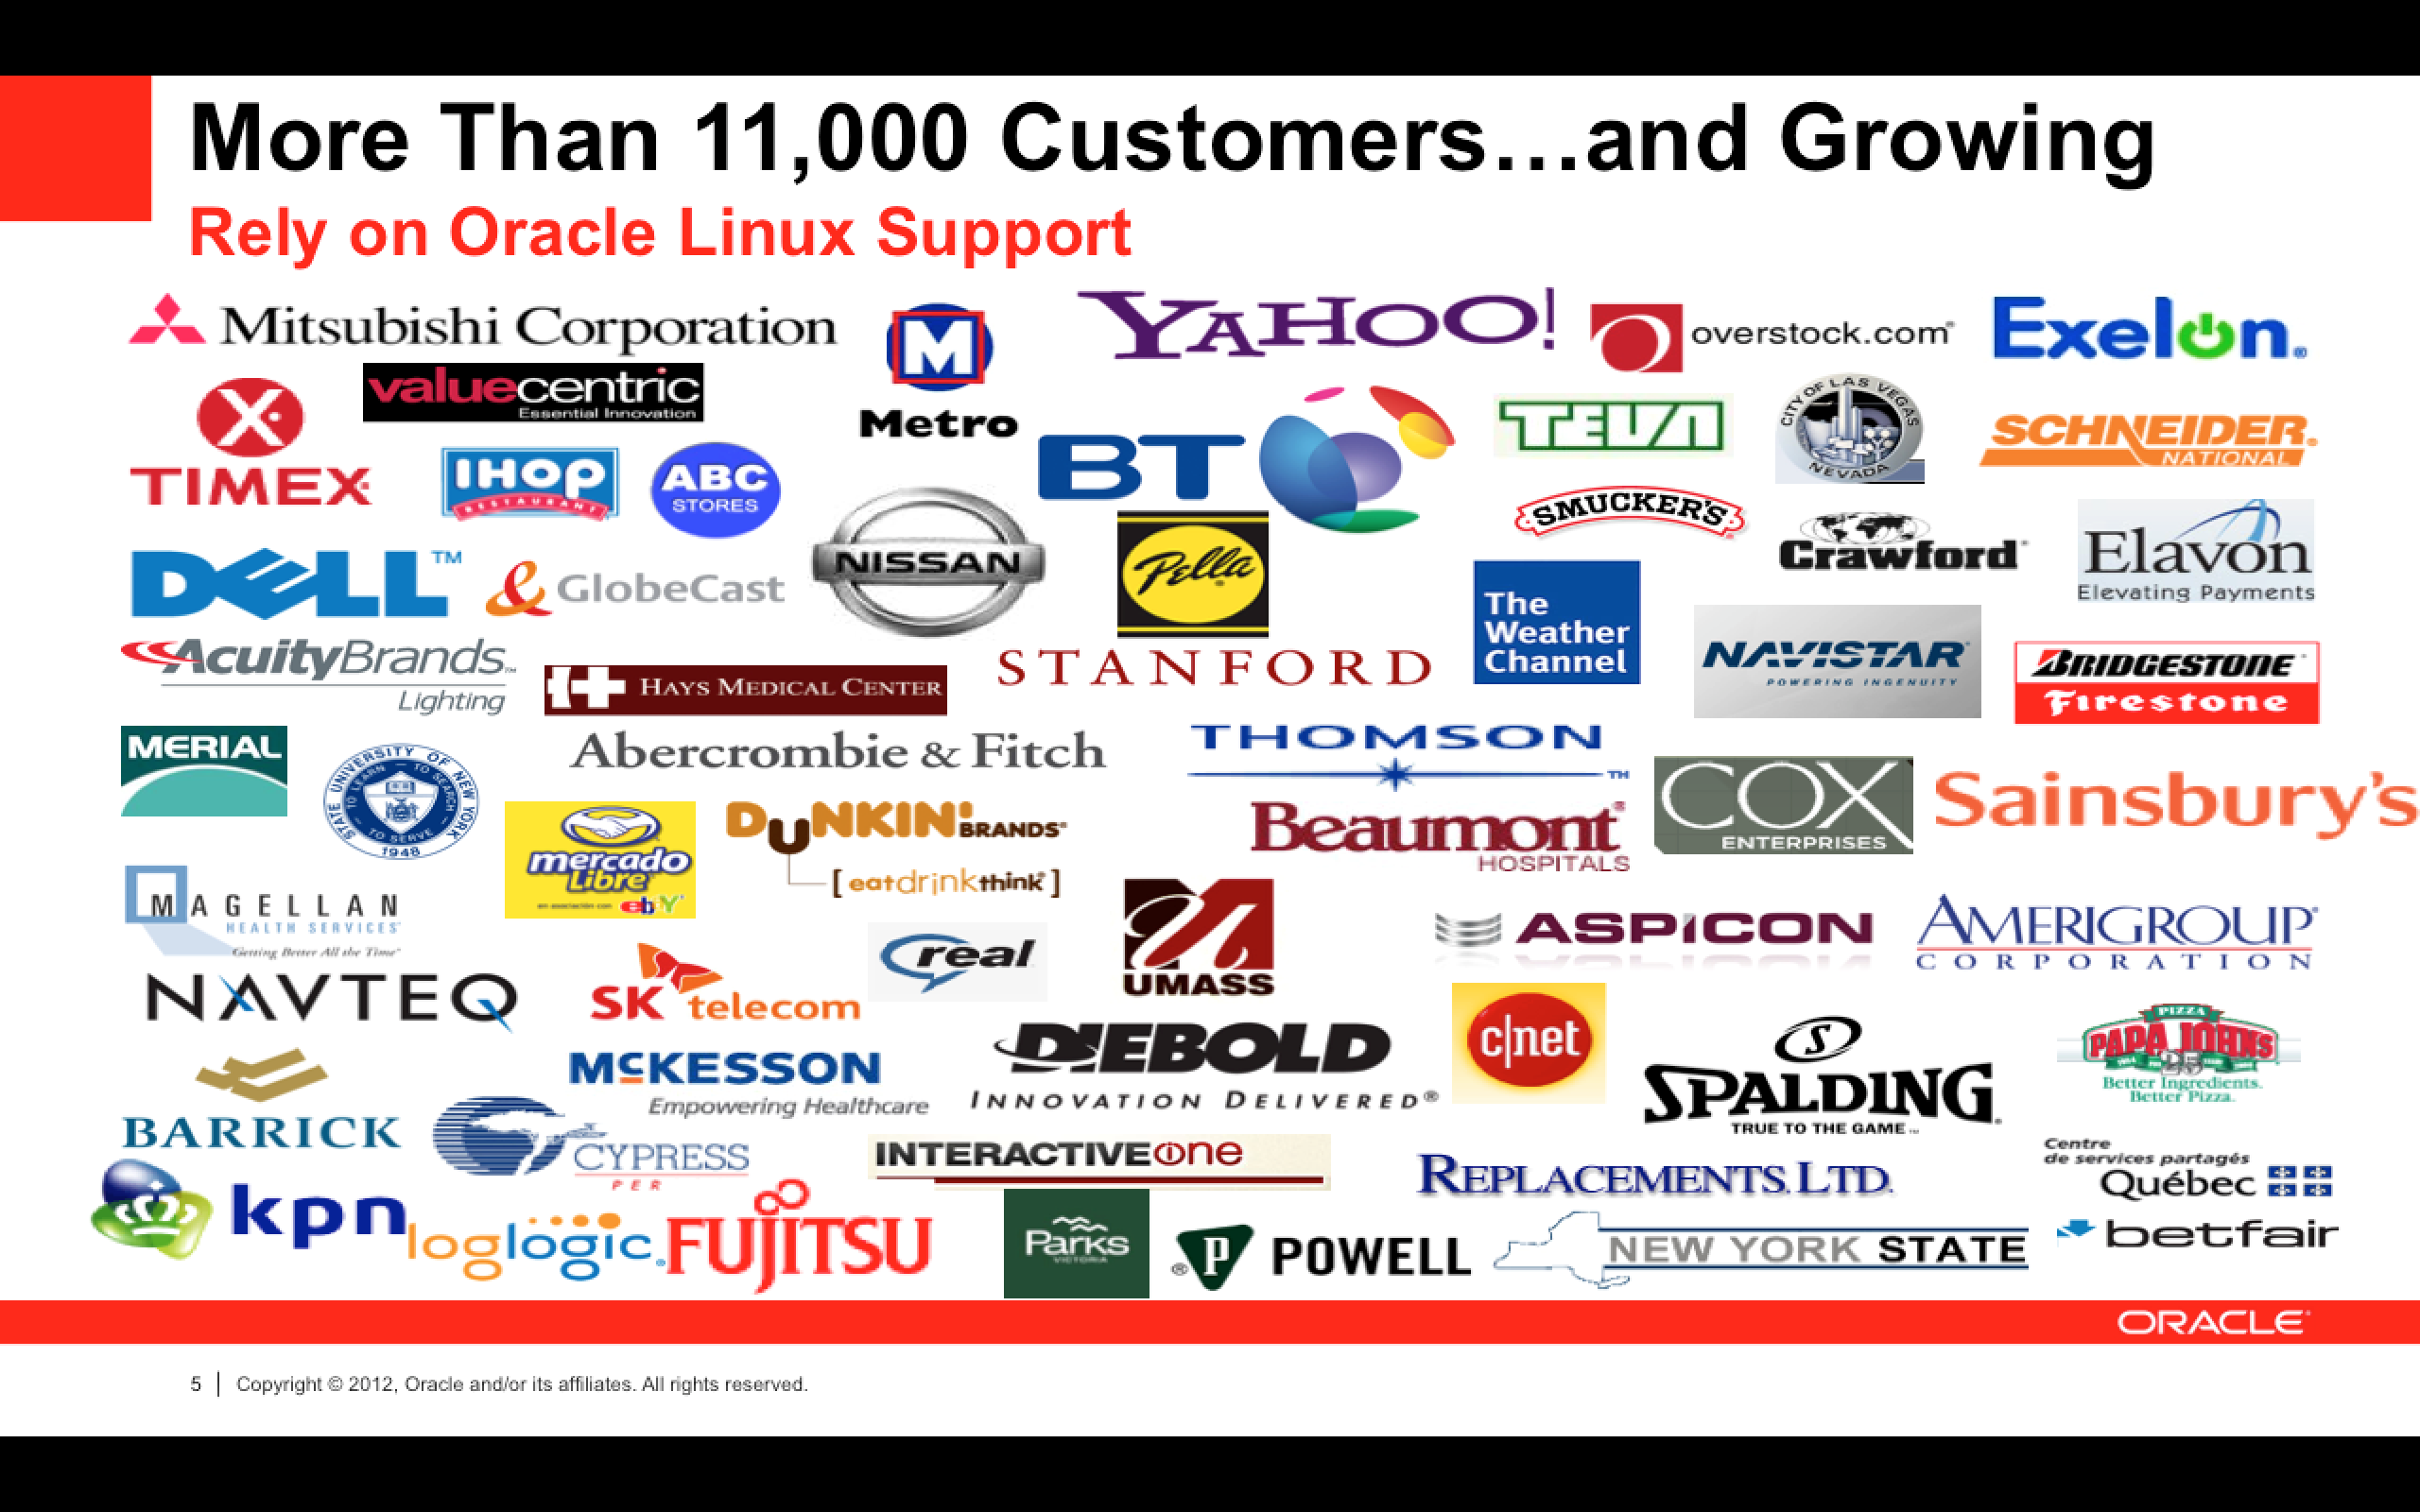 These companies have believed in Oracle so much that they have become partners, as well.